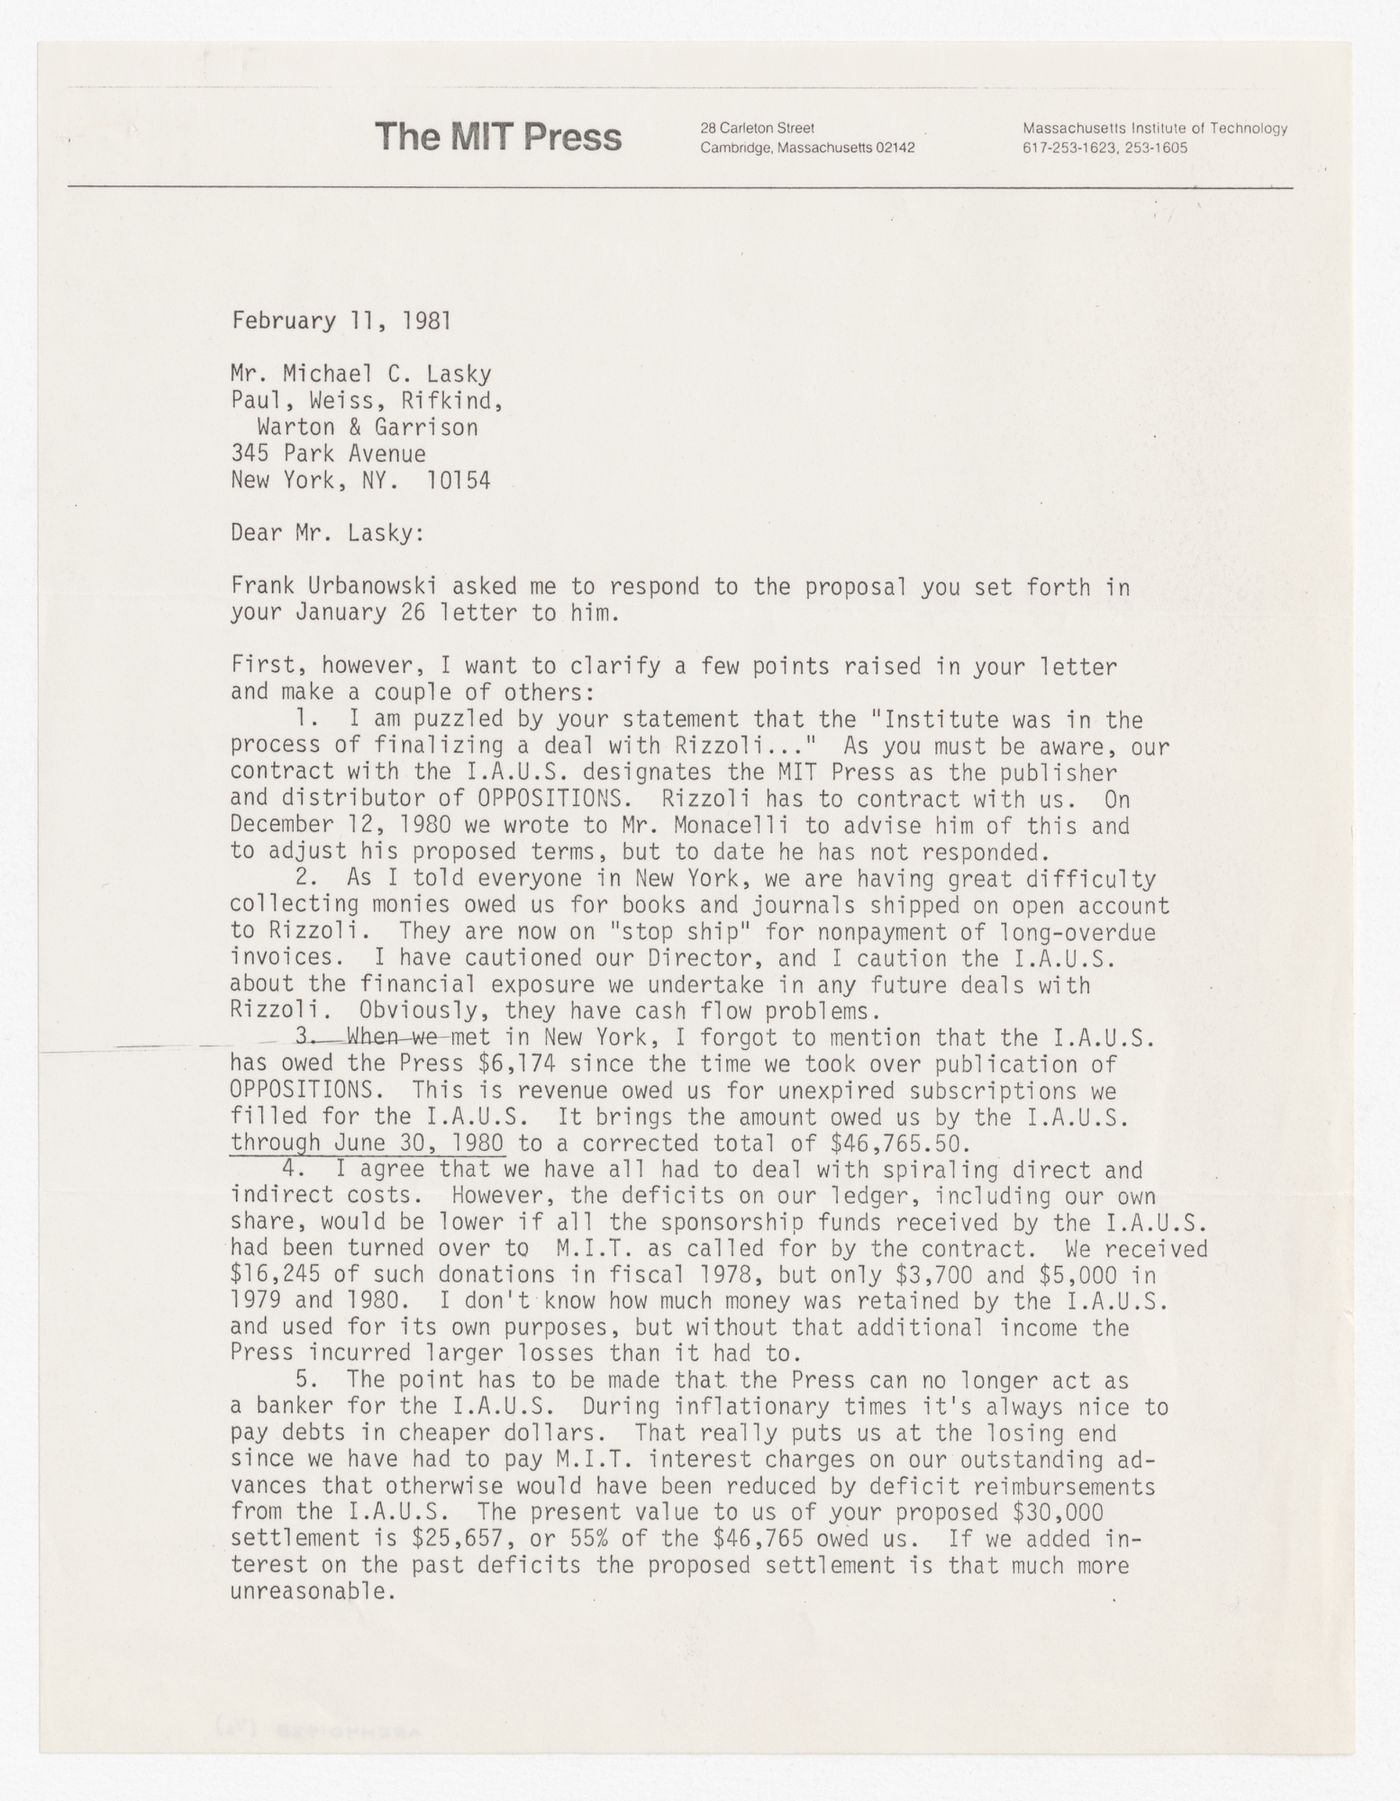 Letter from Michael Leonard to Michael C. Lasky about distribution rights and financial status of Oppositions Journal